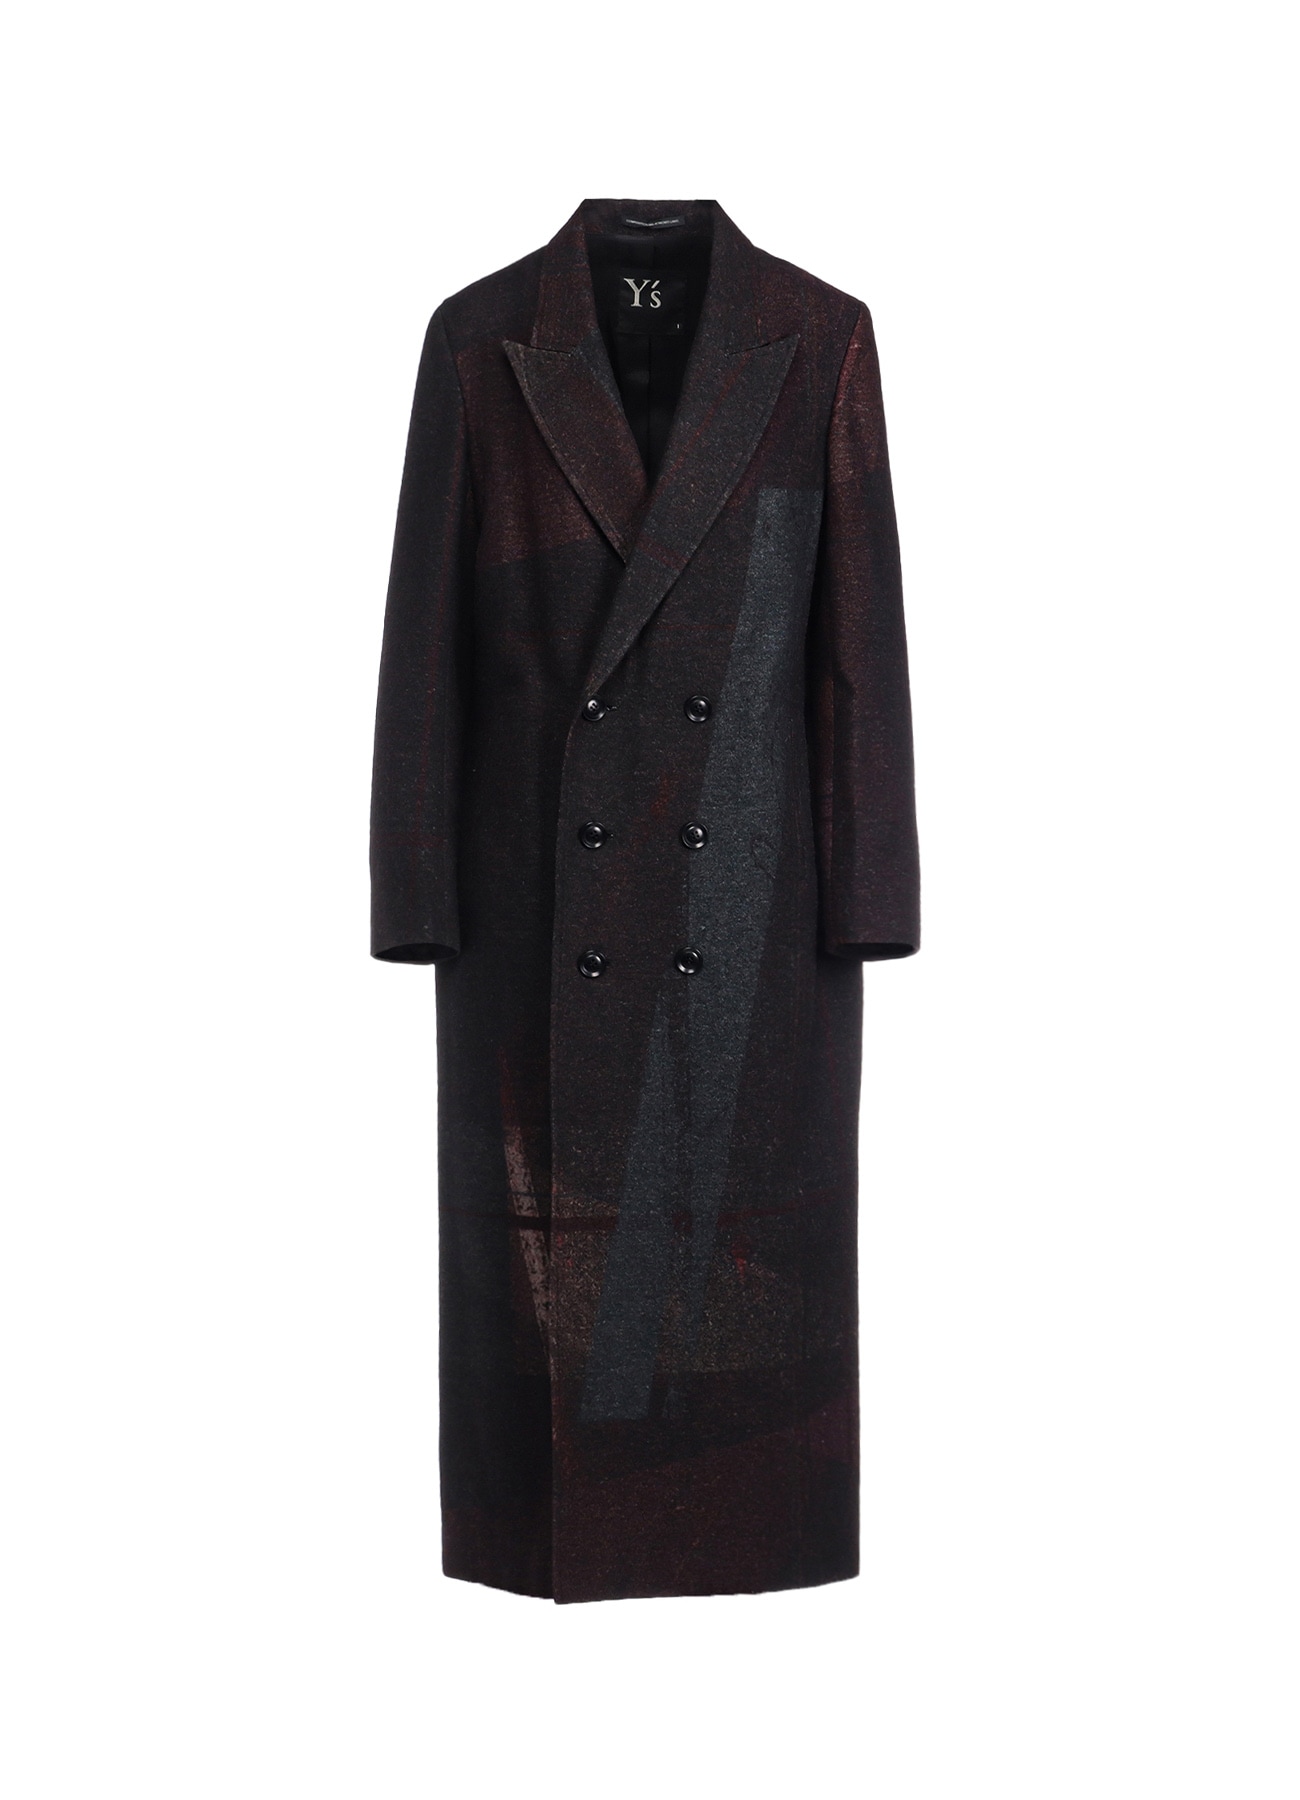 RAISED C/W TWILL PEALED CHECK PT W FRONT LONG COAT